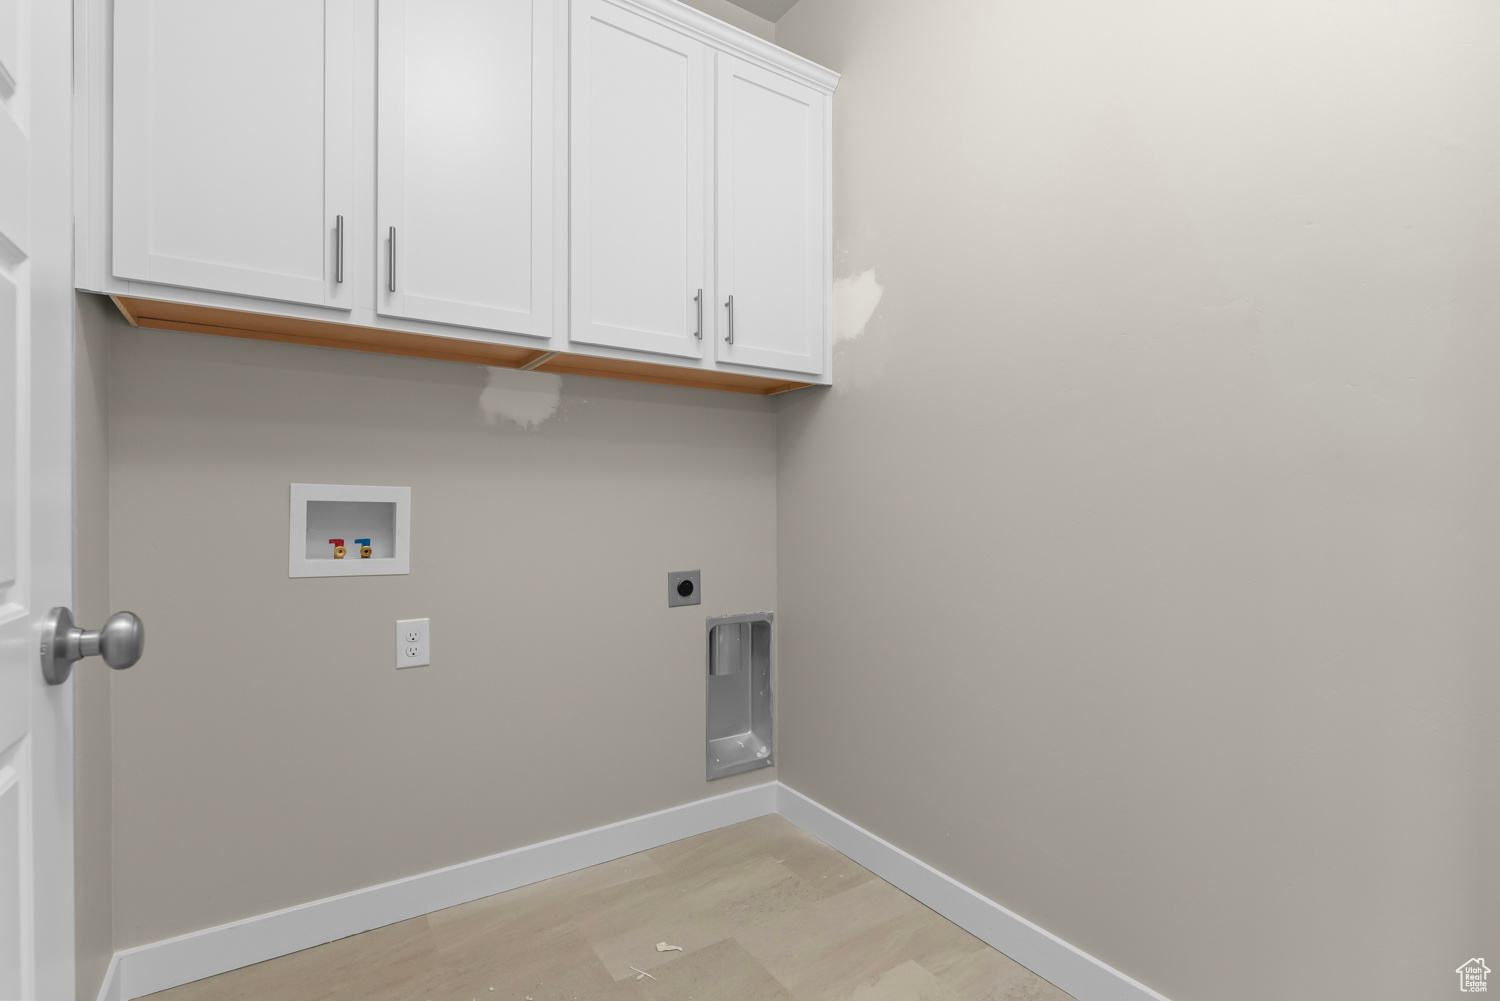 Laundry room with hookup for a washing machine, light hardwood / wood-style flooring, electric dryer hookup, and cabinets